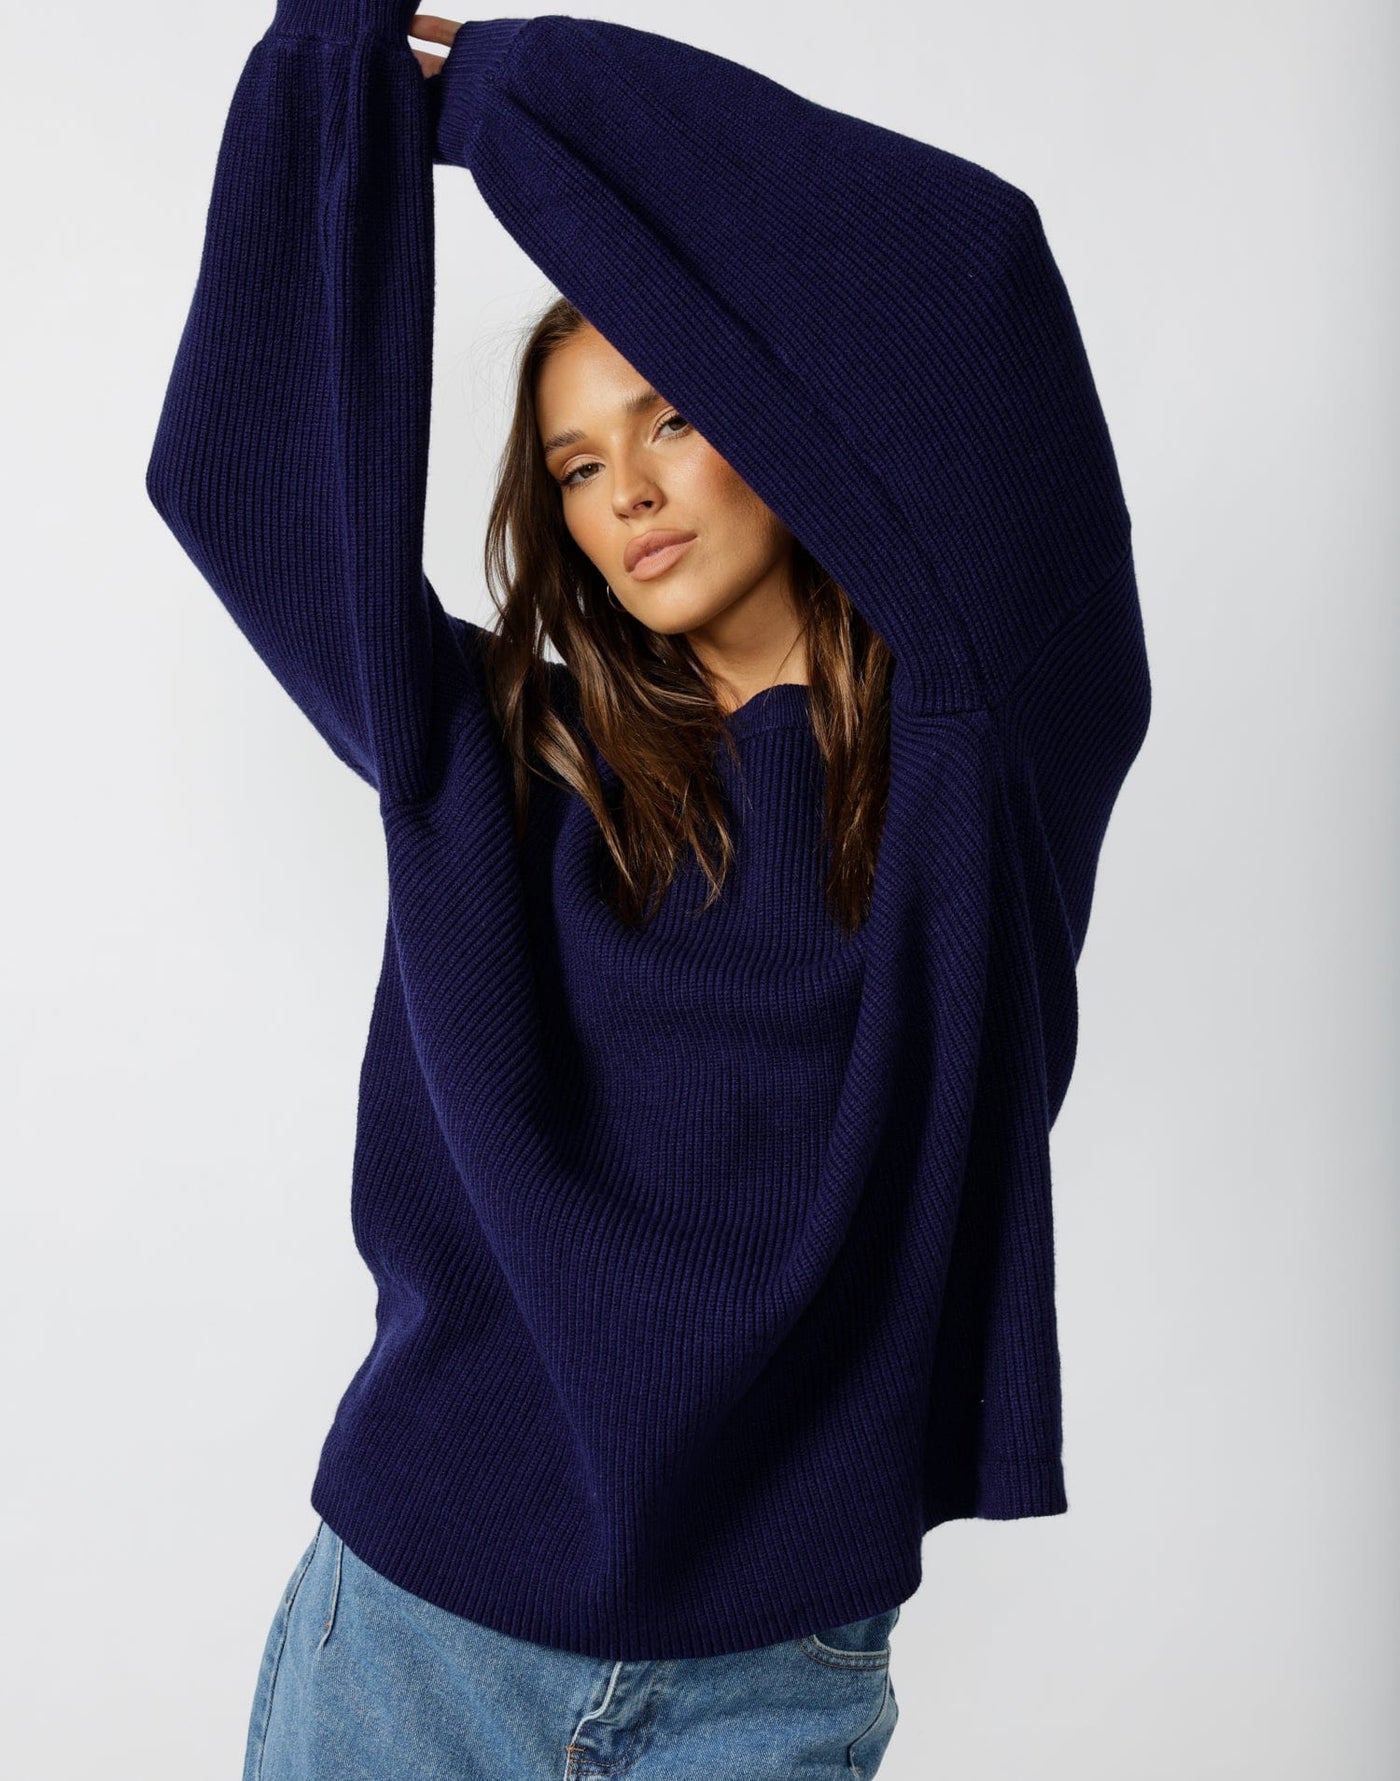 Cody Oversized Jumper (Navy) - Navy Oversized Knit Jumper - Women's Top - Charcoal Clothing